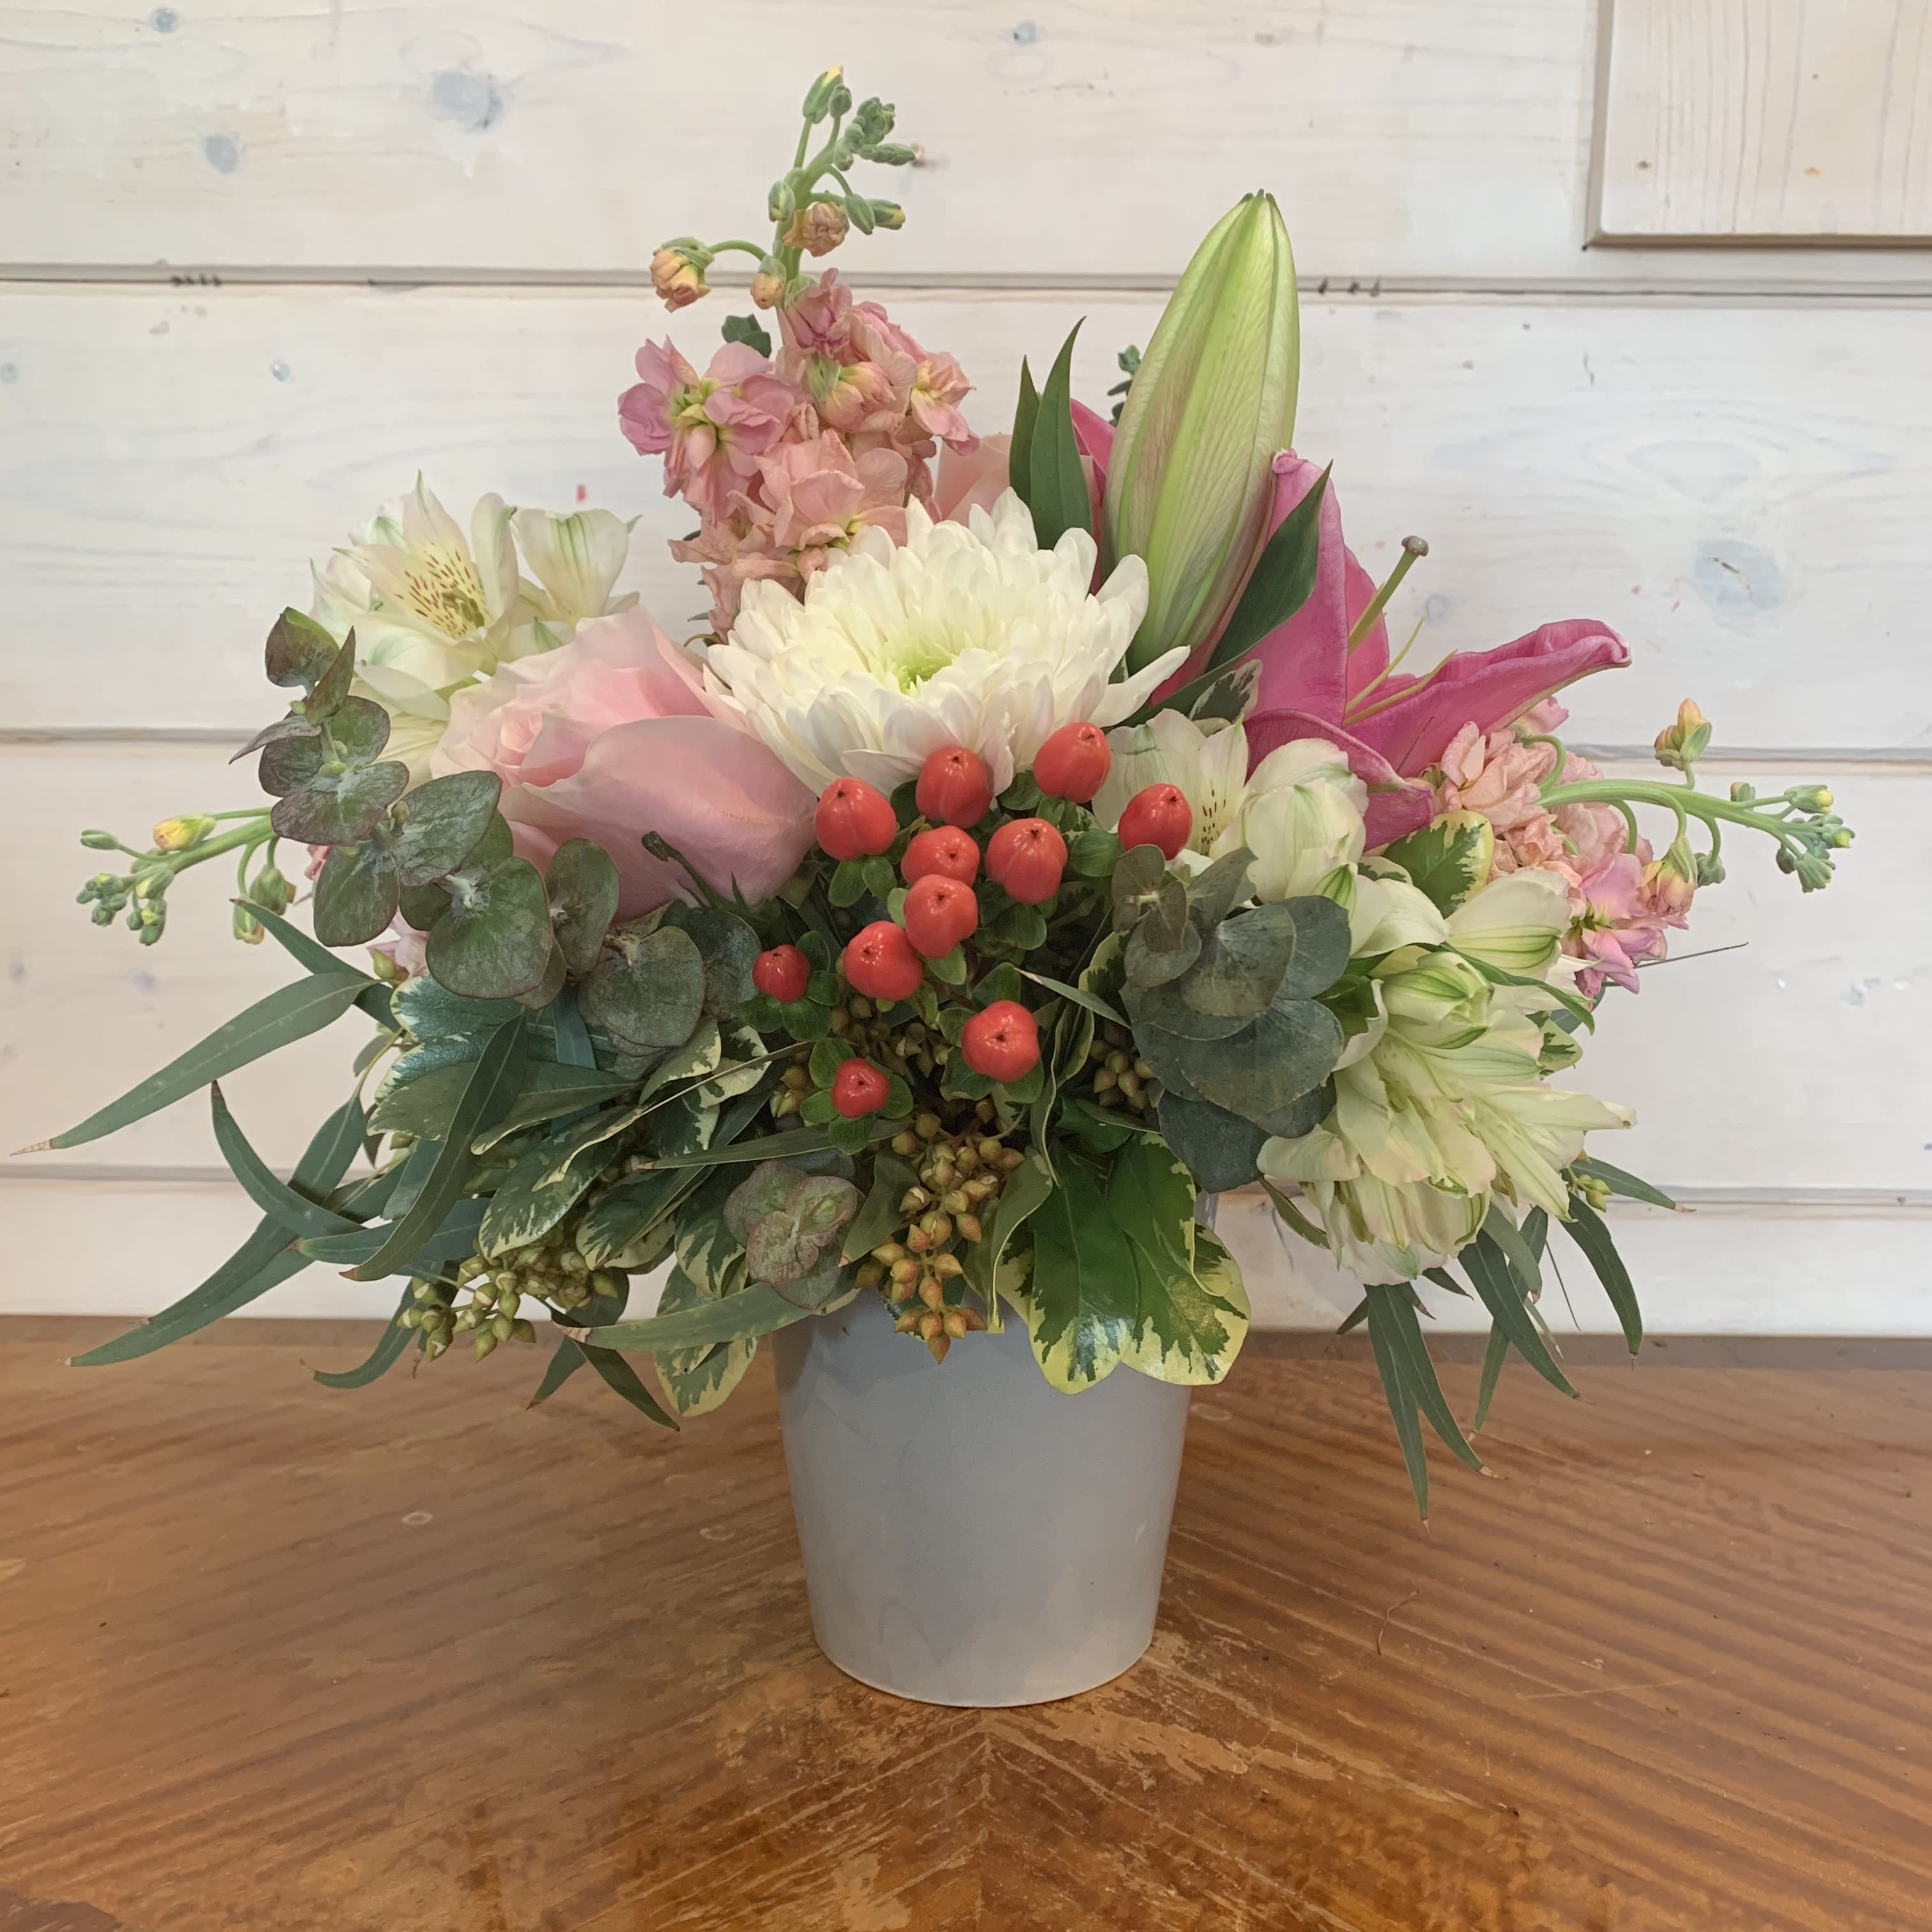 Pastel Pinks Bouquet  - Pale pink roses, pink lily, peach stock, white cremon chrysanthemums and alstromeria arranged in a grey cache pot with hypericum berries and mixed eucalyptus. Approximately 12in tall and 12in wide. 